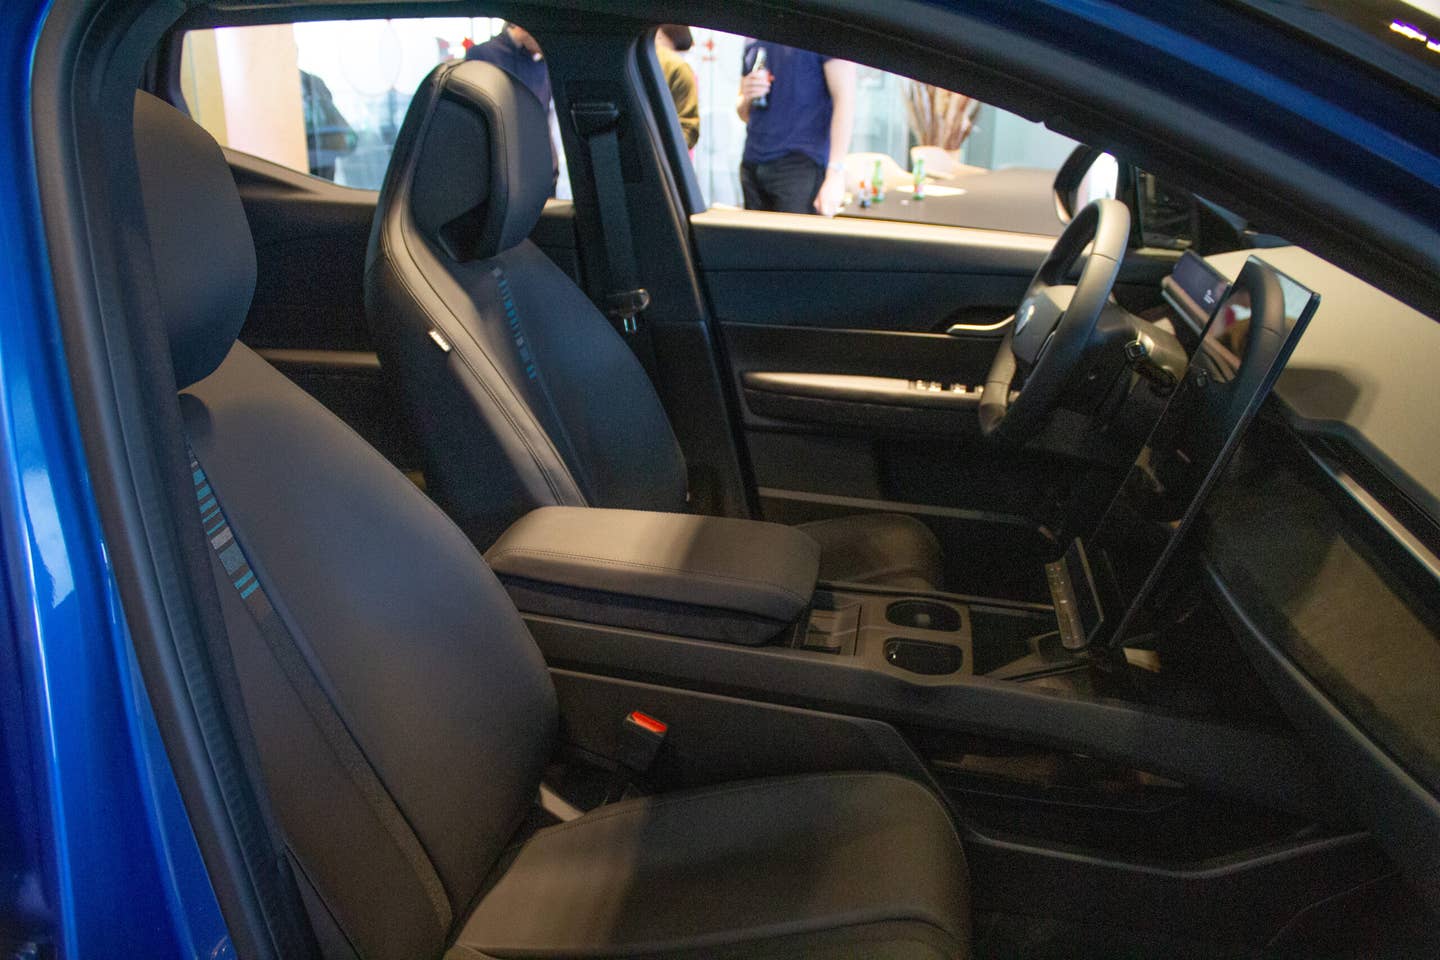 The EV's interior is nothing shocking on the surface, but it's brimming with interesting features.